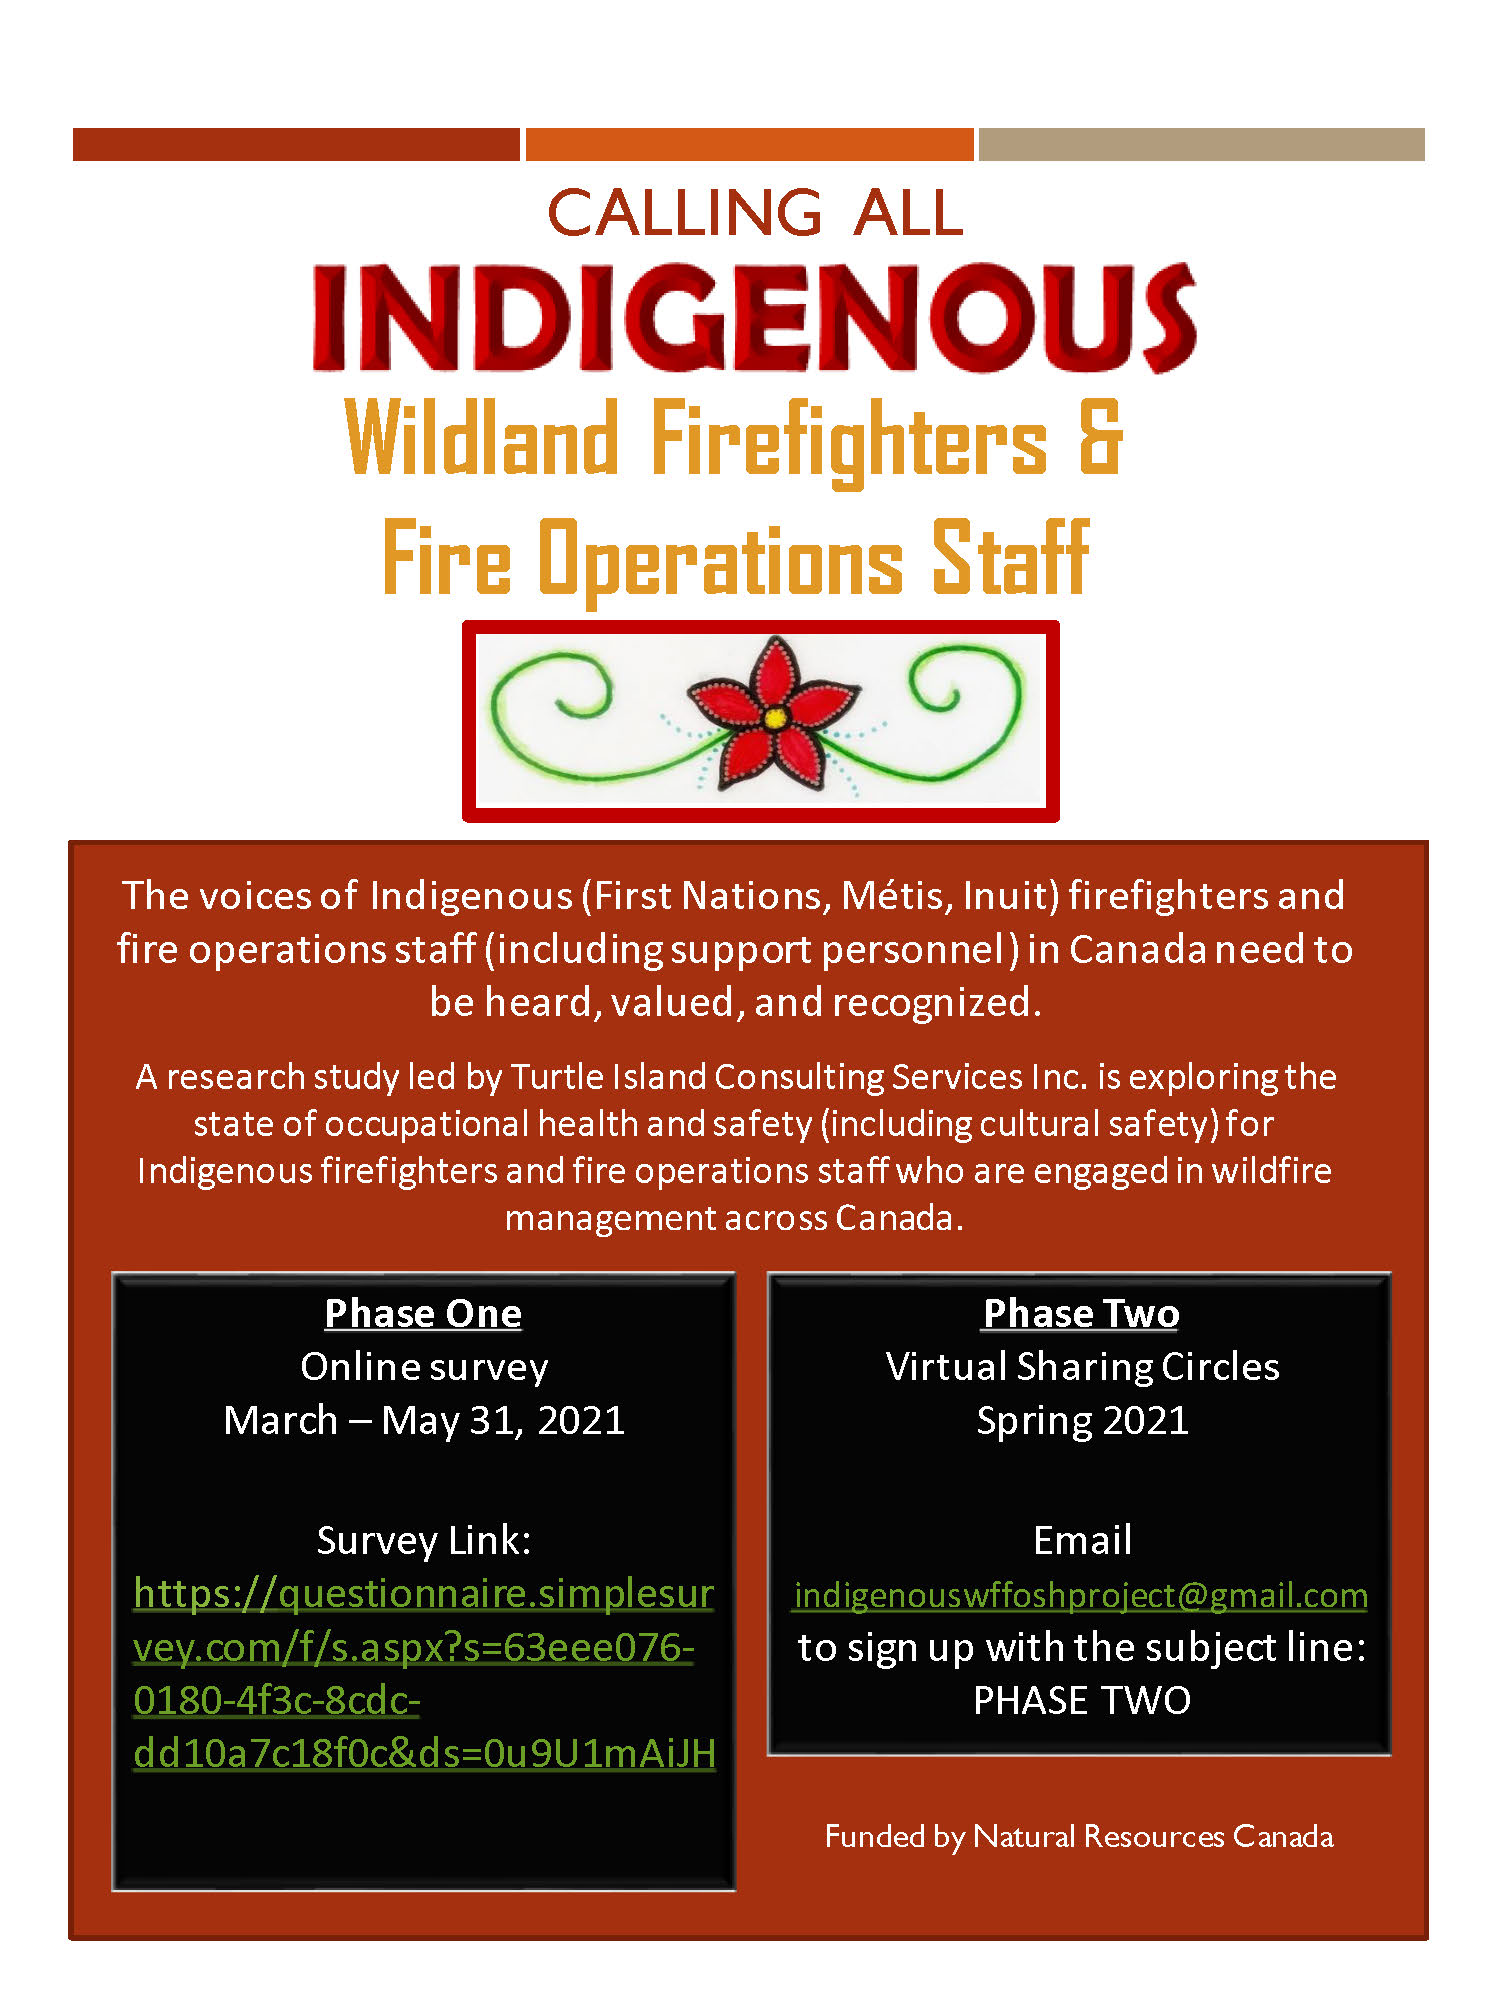 Calling All Indigenous Wildland Firefighters & Fire Operations Staff